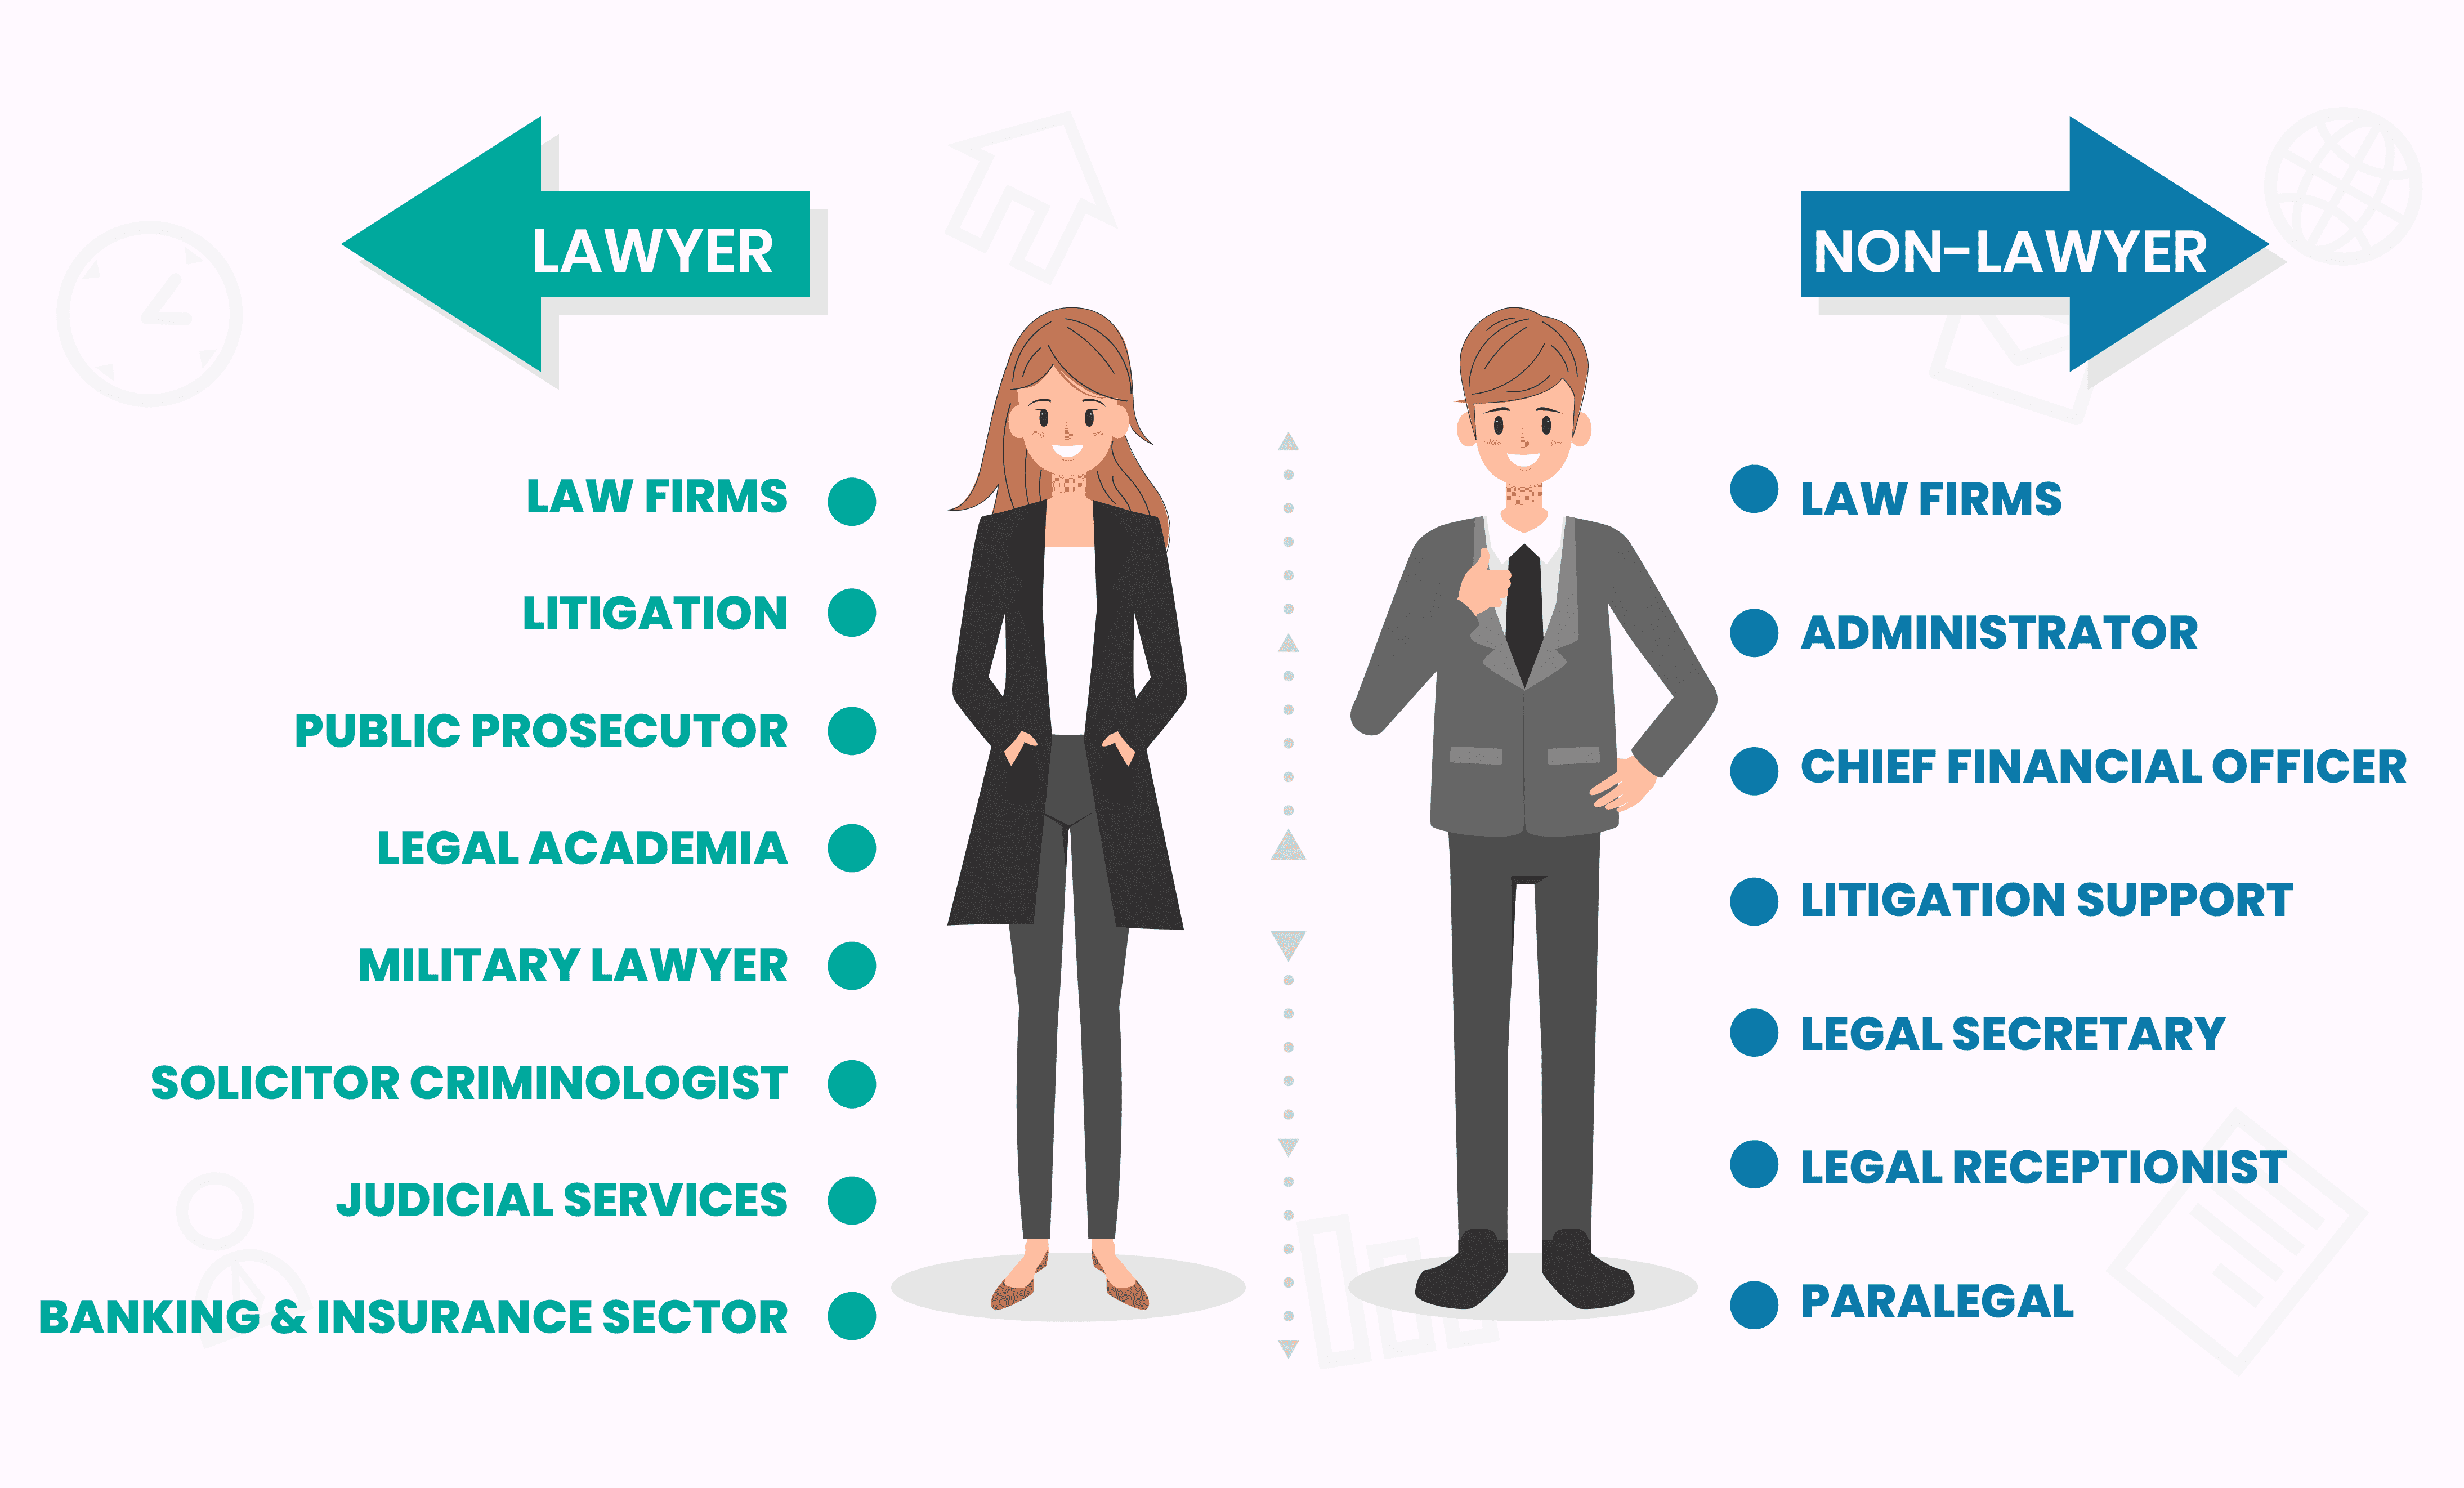 Types of Lawyer and Lawyer Services